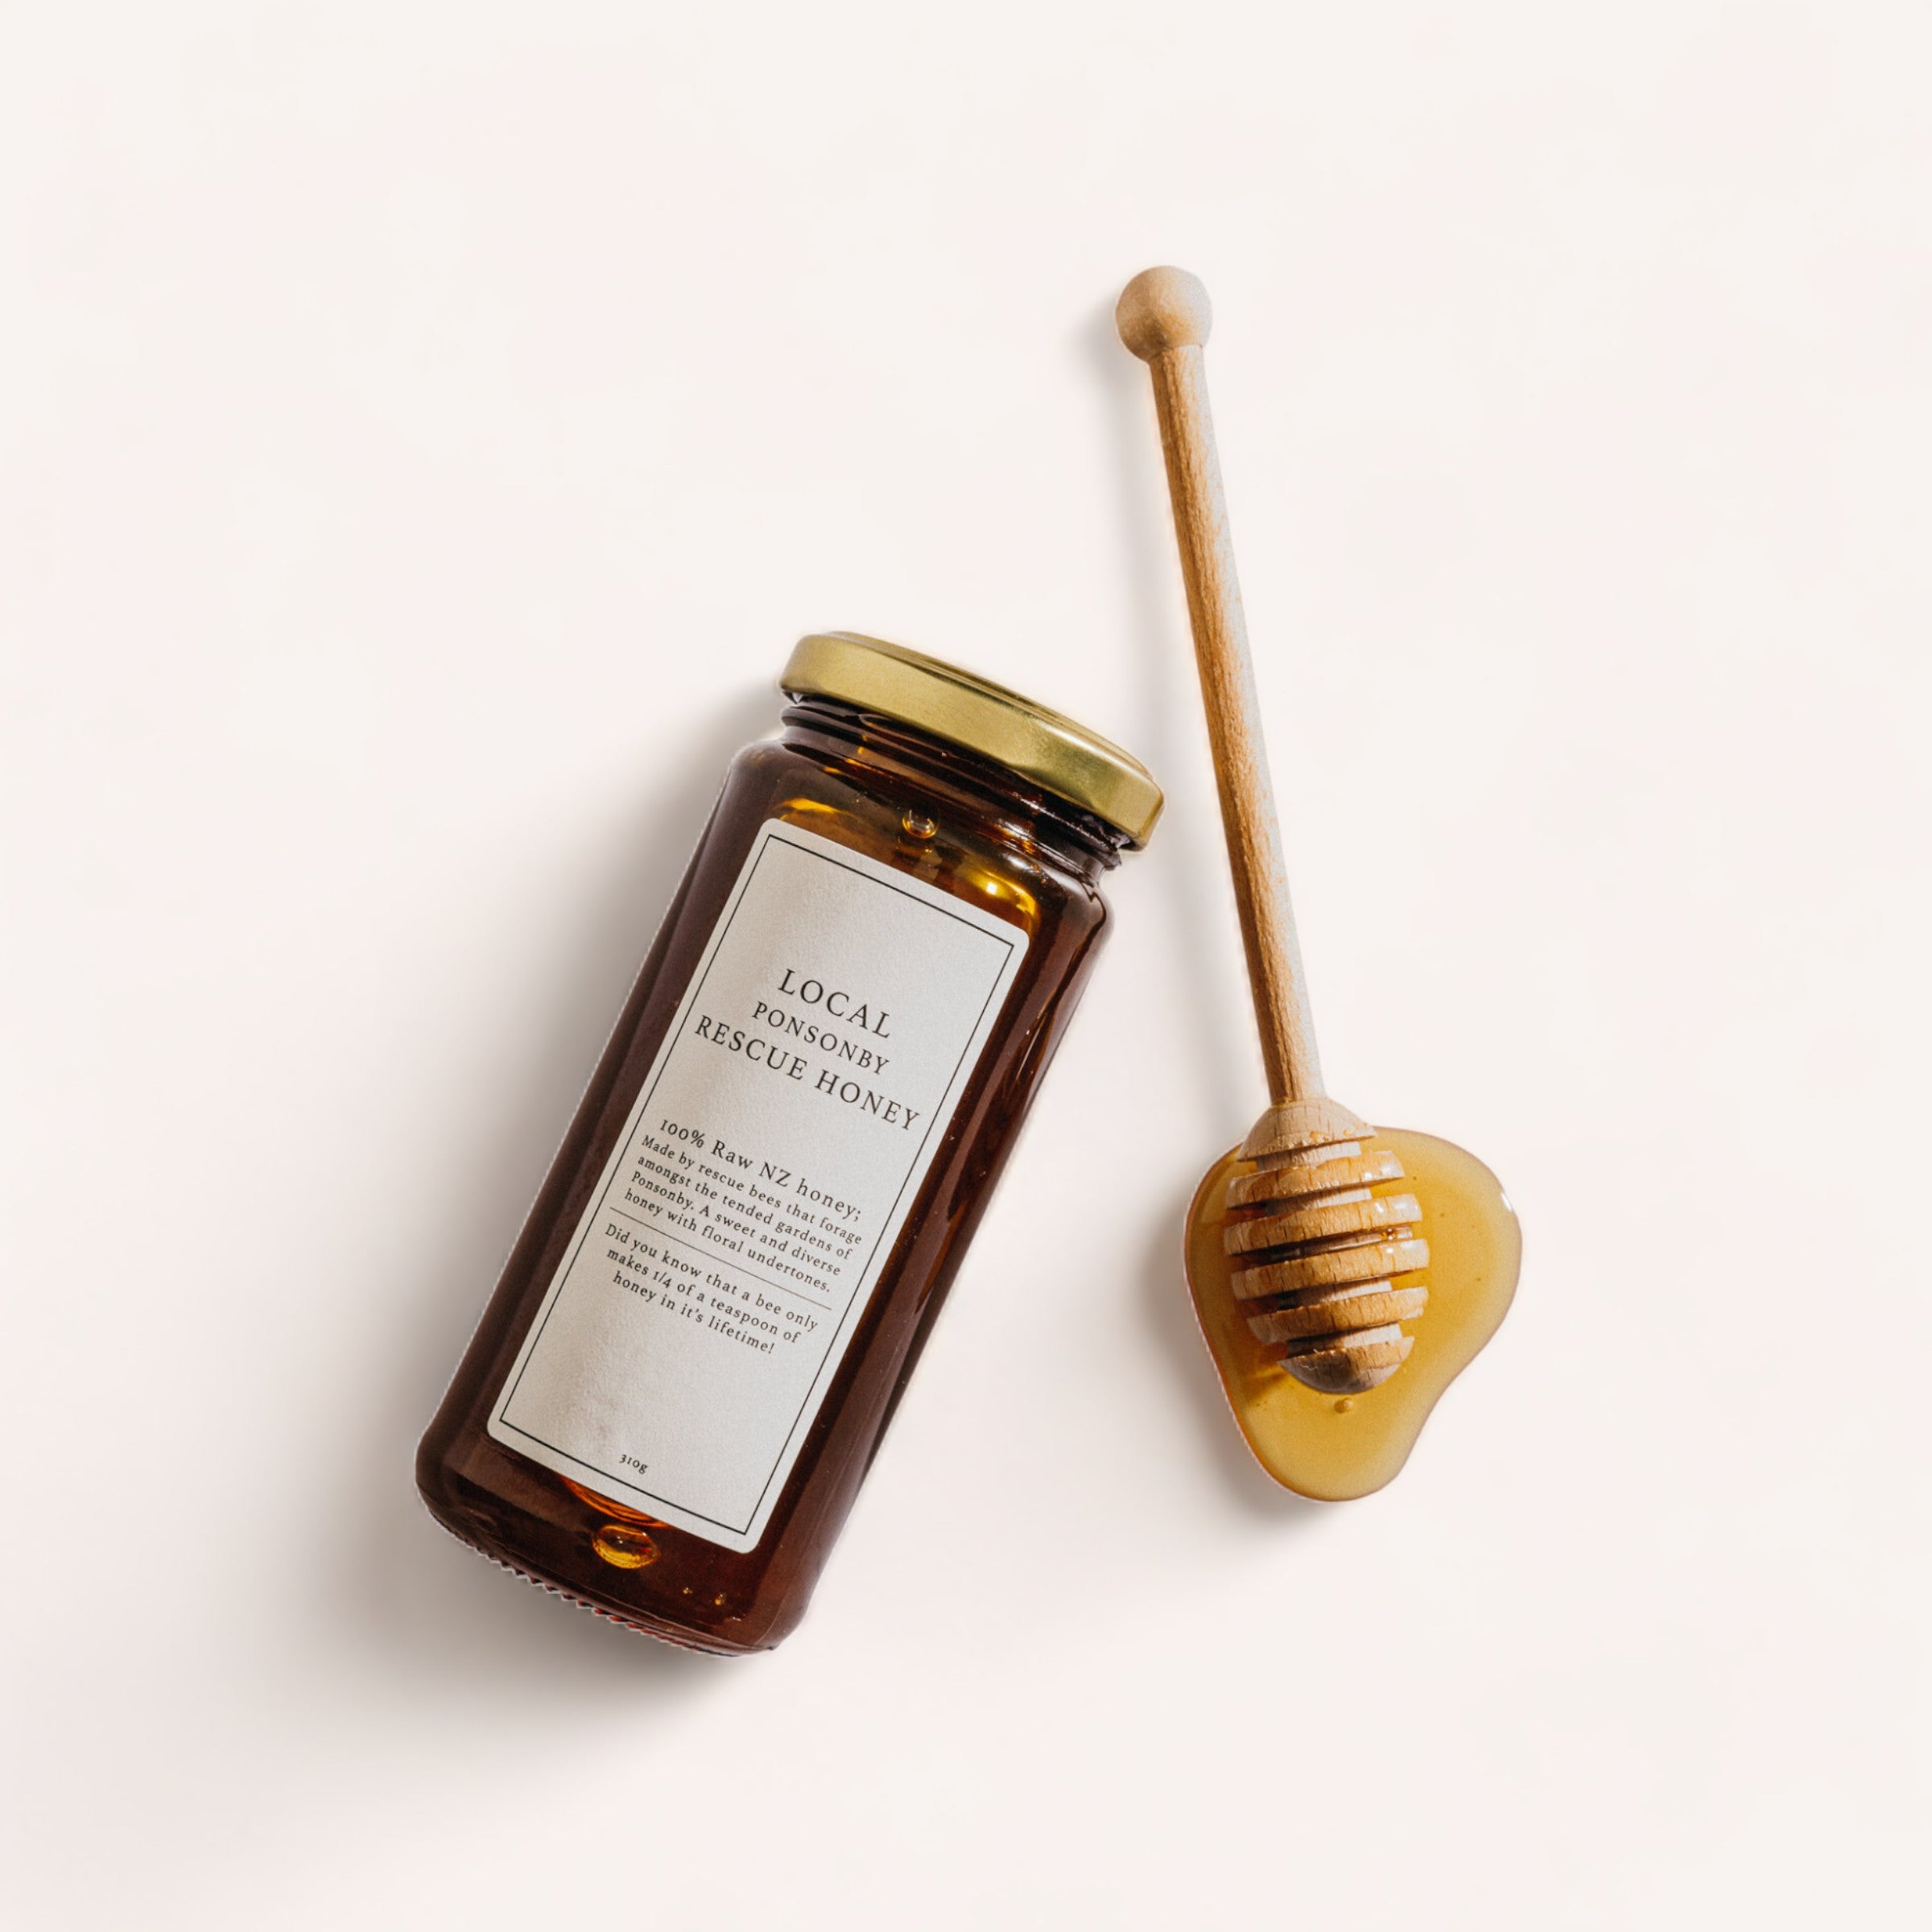 A jar of Ponsonby Rescue Honey by Bees Up Top with a wooden honey dipper on a white background.